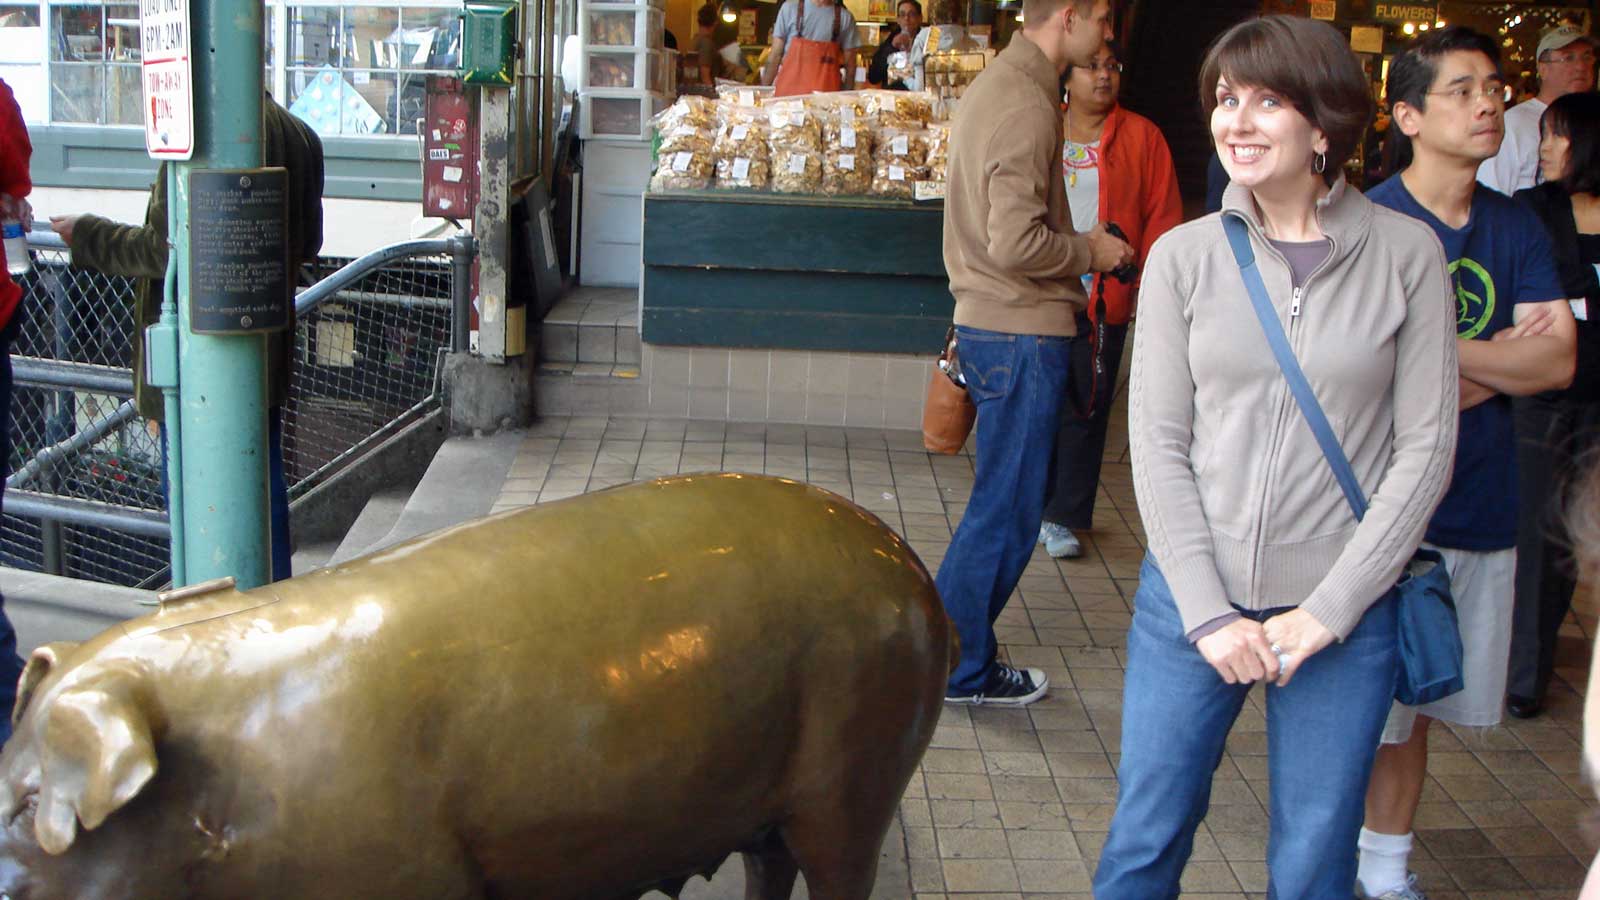 Rebecca standing next to a large bronze pig